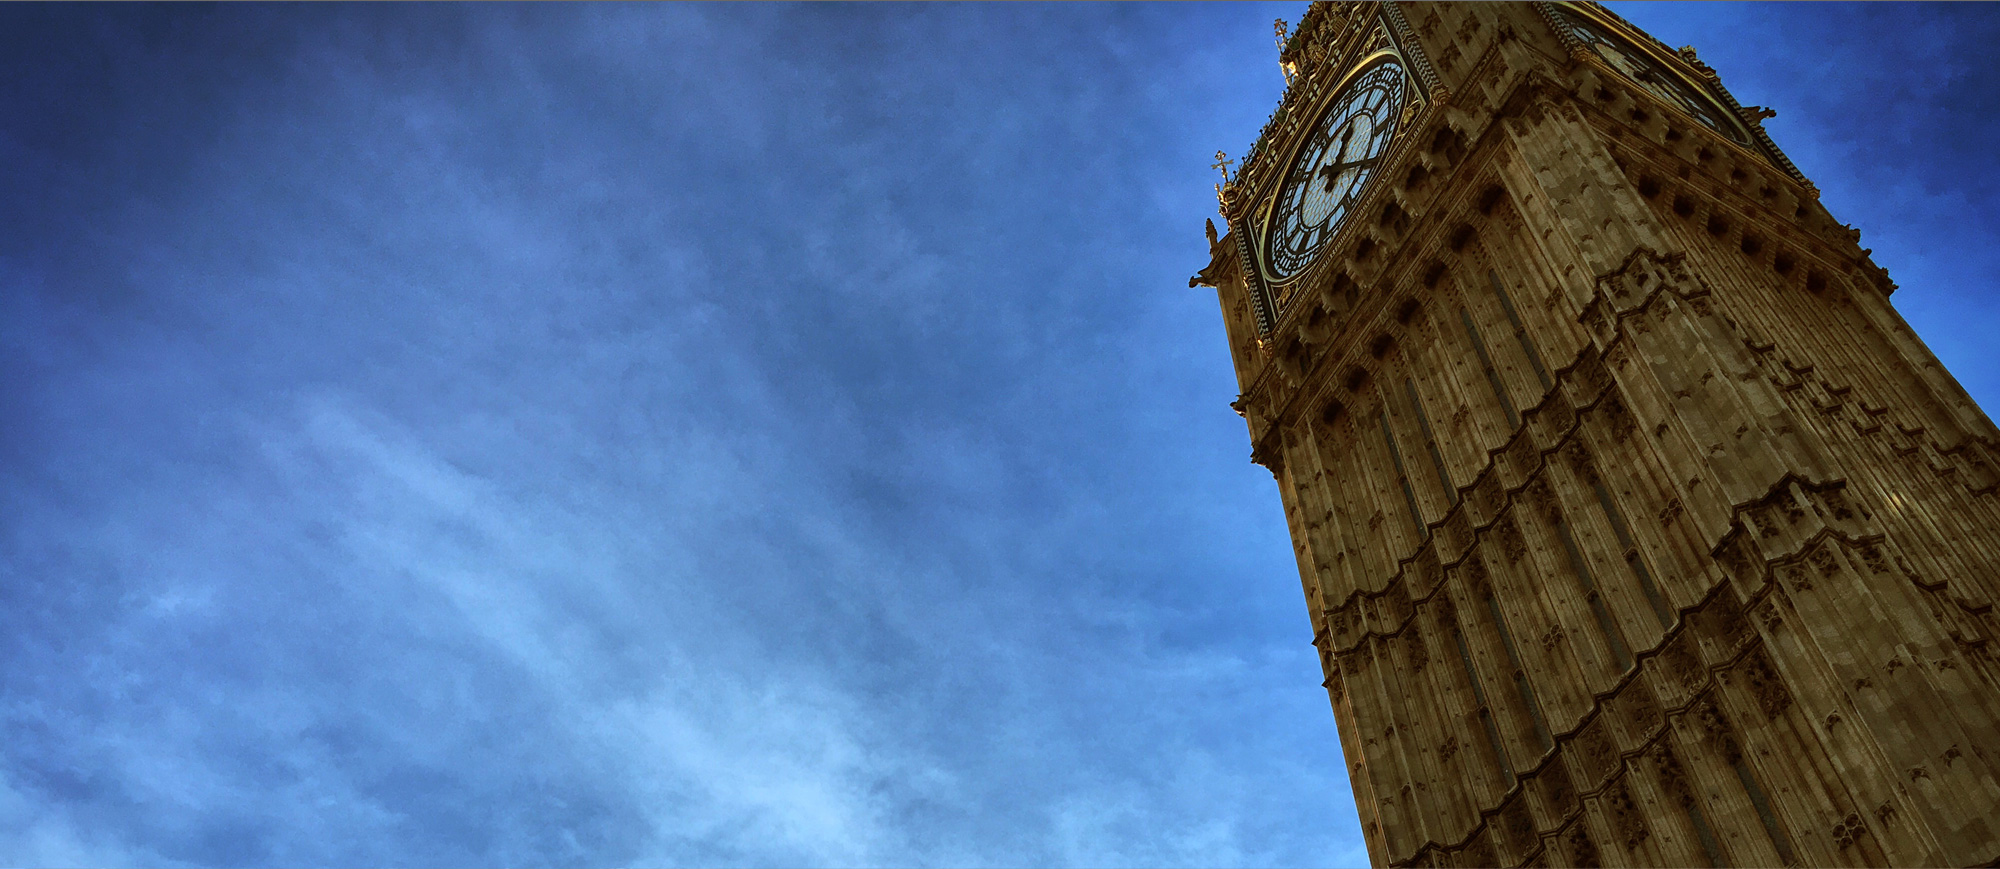 Photo of Big Ben Tower in London